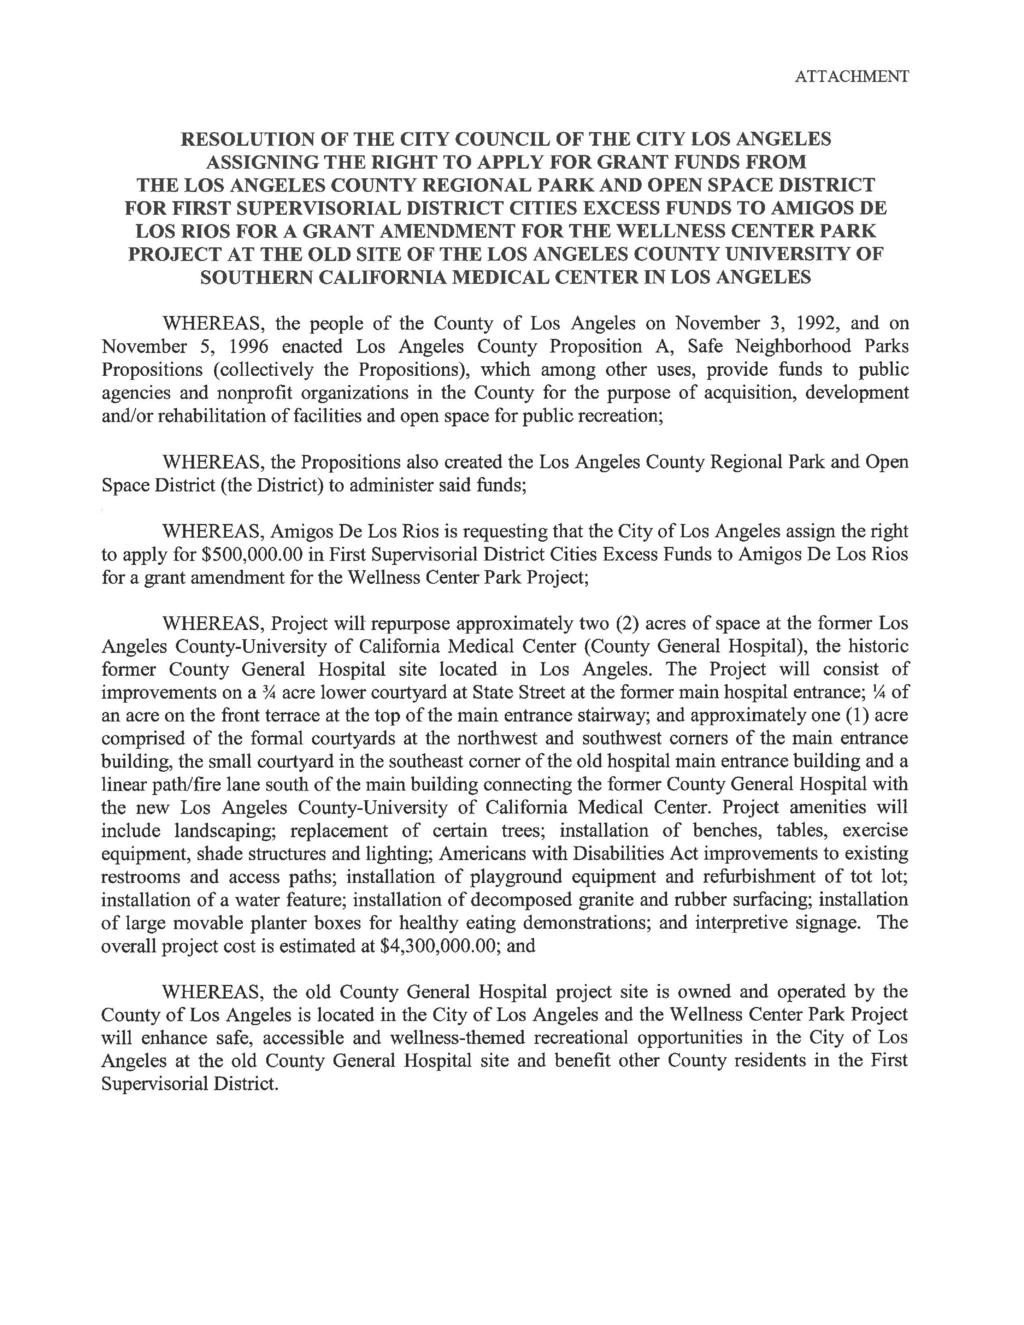 ATTACHMENT RESOLUTION OF THE CITY COUNCIL OF THE CITY LOS ANGELES ASSIGNING THE RIGHT TO APPLY FOR GRANT FUNDS FROM THE LOS ANGELES COUNTY REGIONAL PARK AND OPEN SPACE DISTRICT FOR FIRST